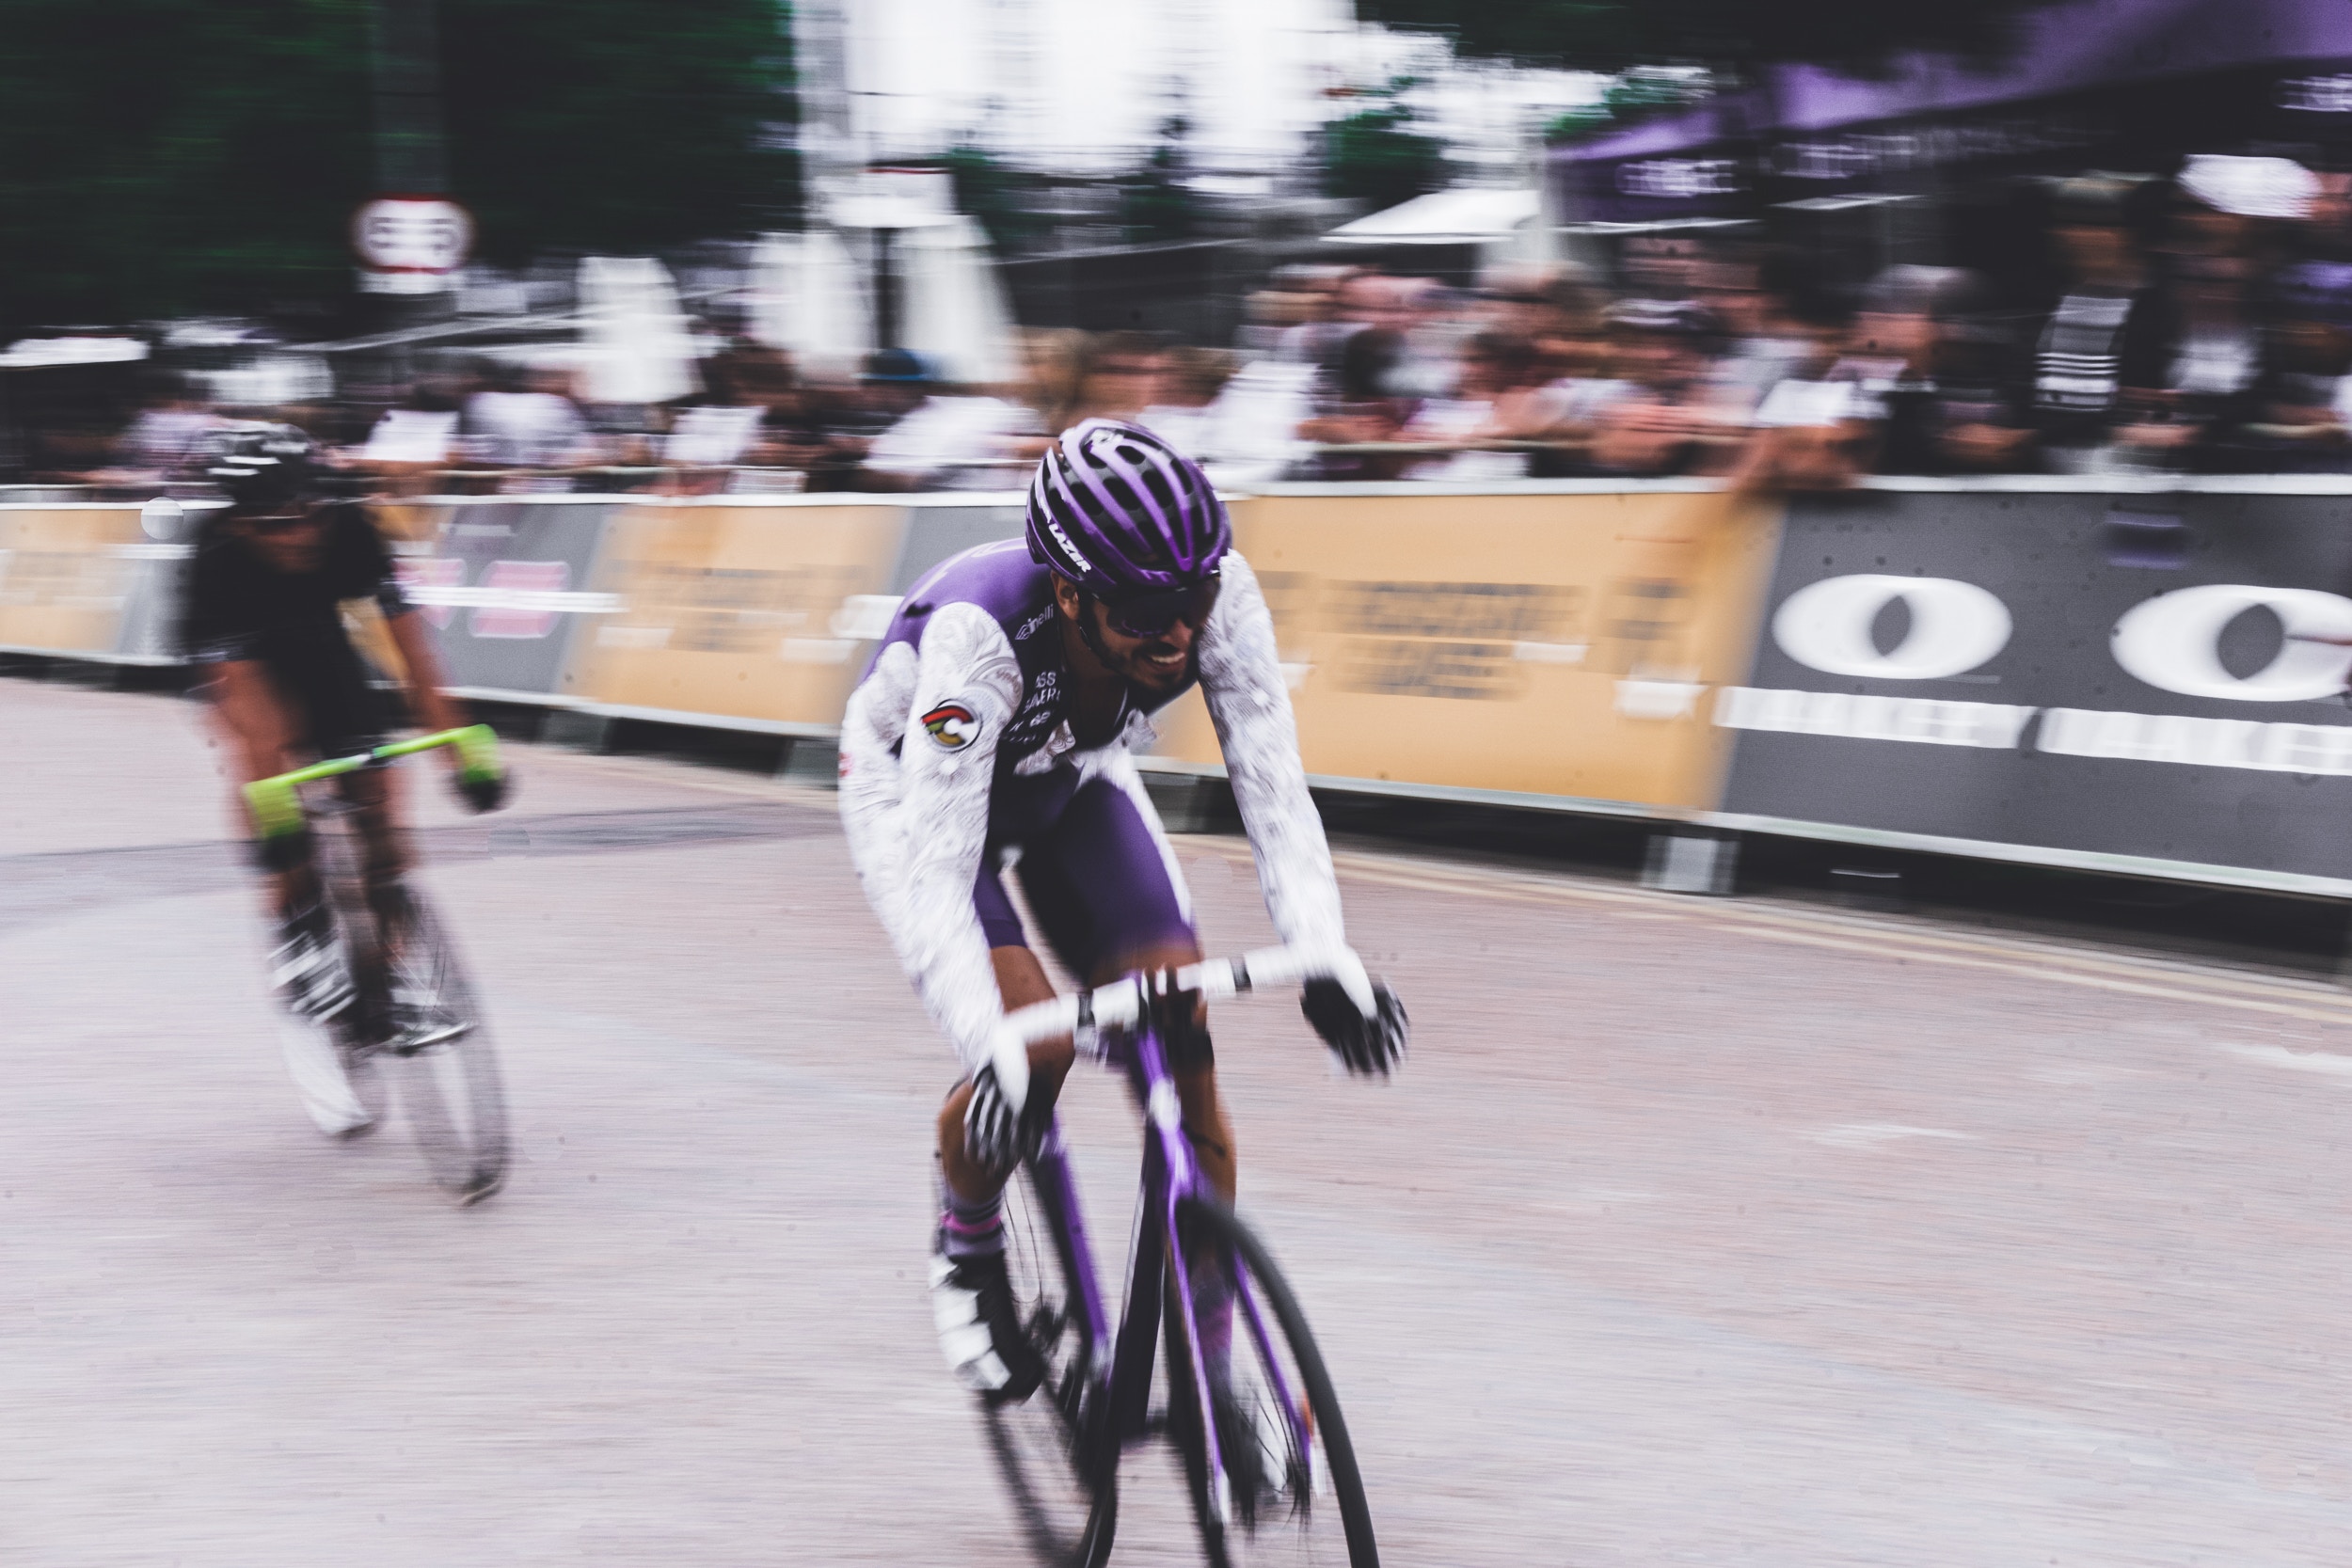 A motion-blurred image of two bike riders during a race.